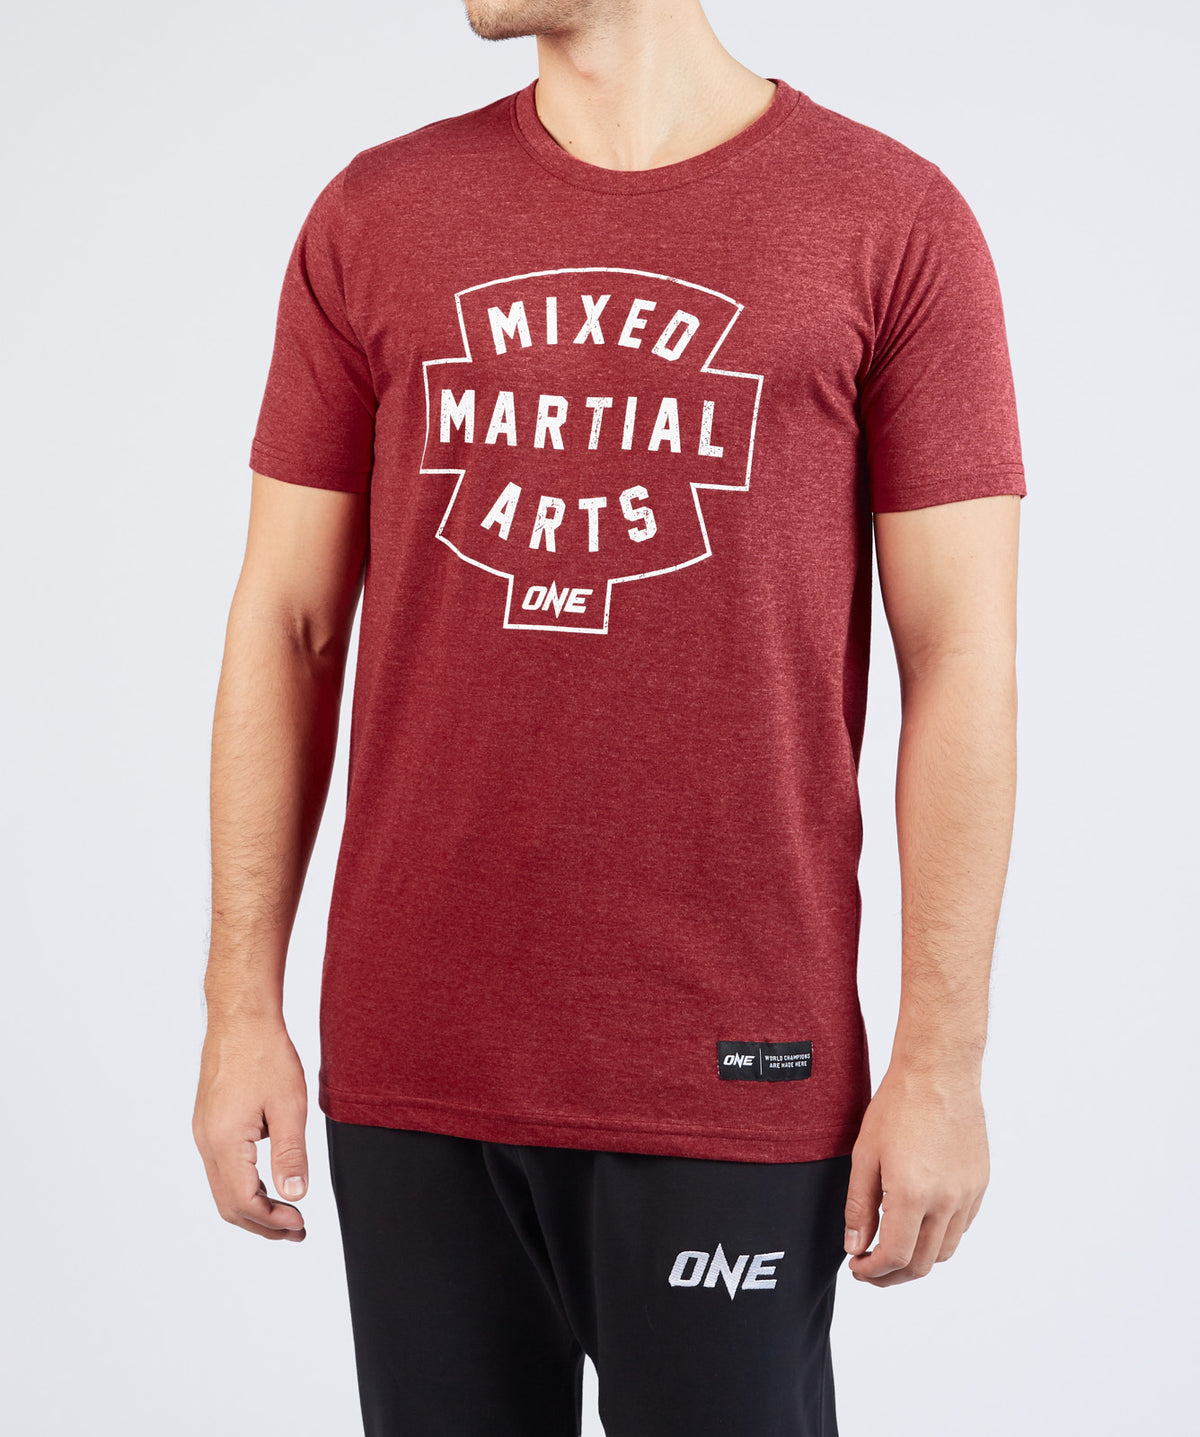 Mixed Martial Arts Vintage Tee - ONE.SHOP | The Official Online Shop of ONE Championship